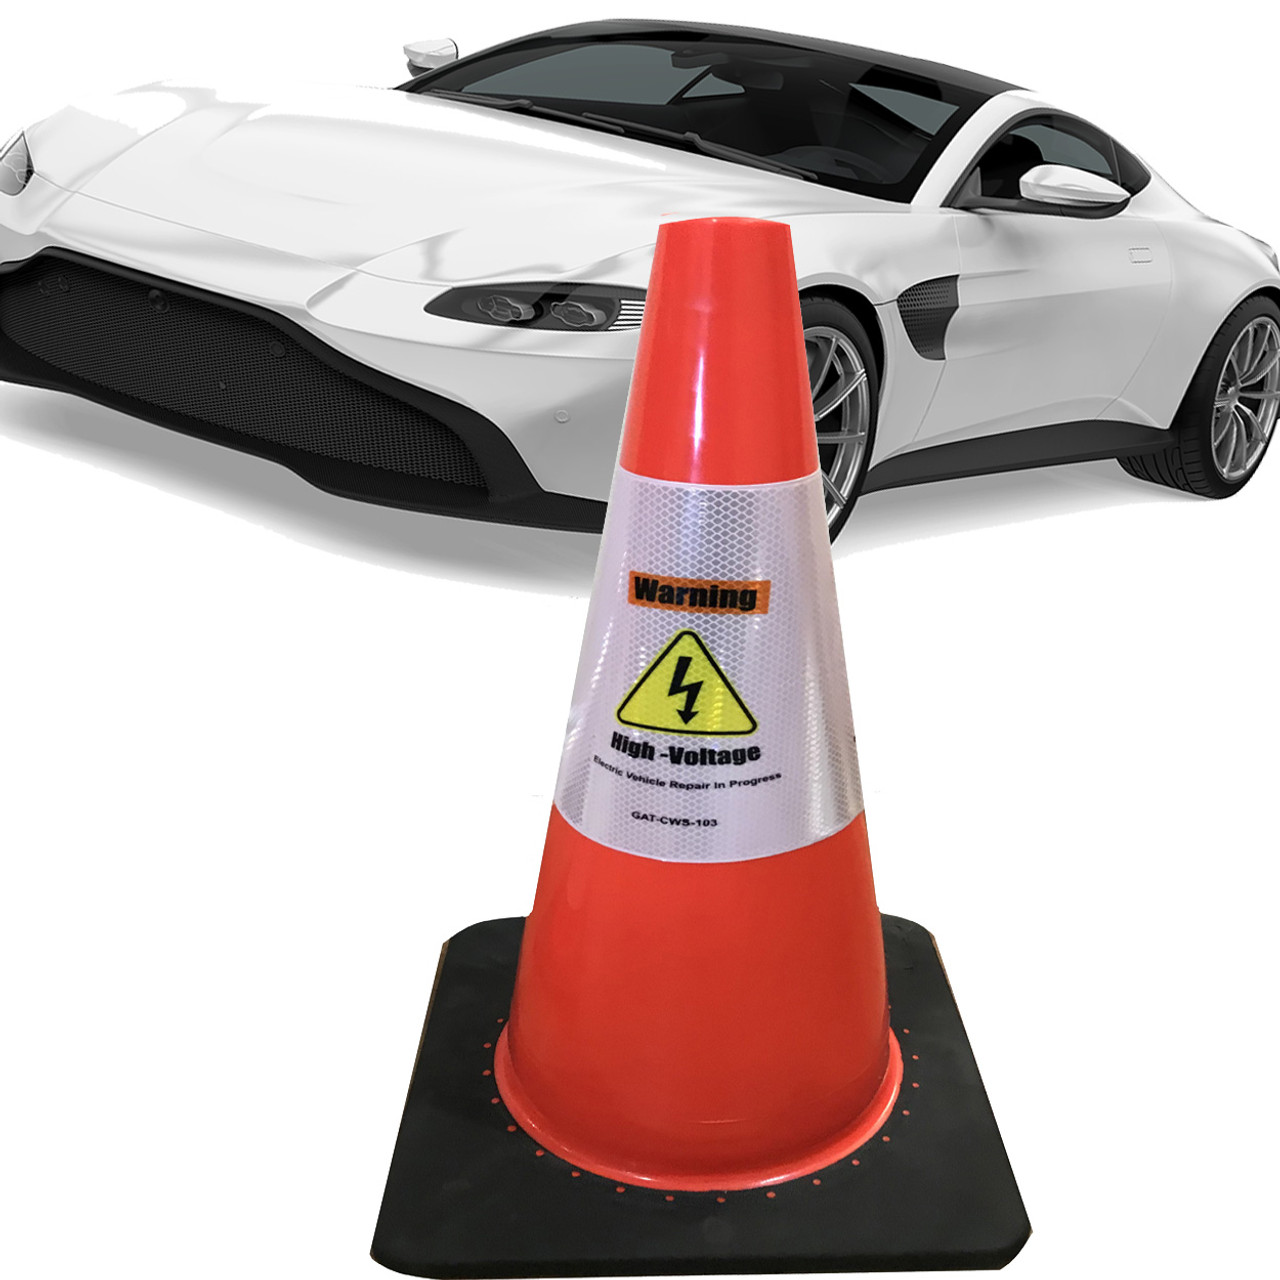 Electric Vehicle High Voltage Warning Sign - Cone Collar-8